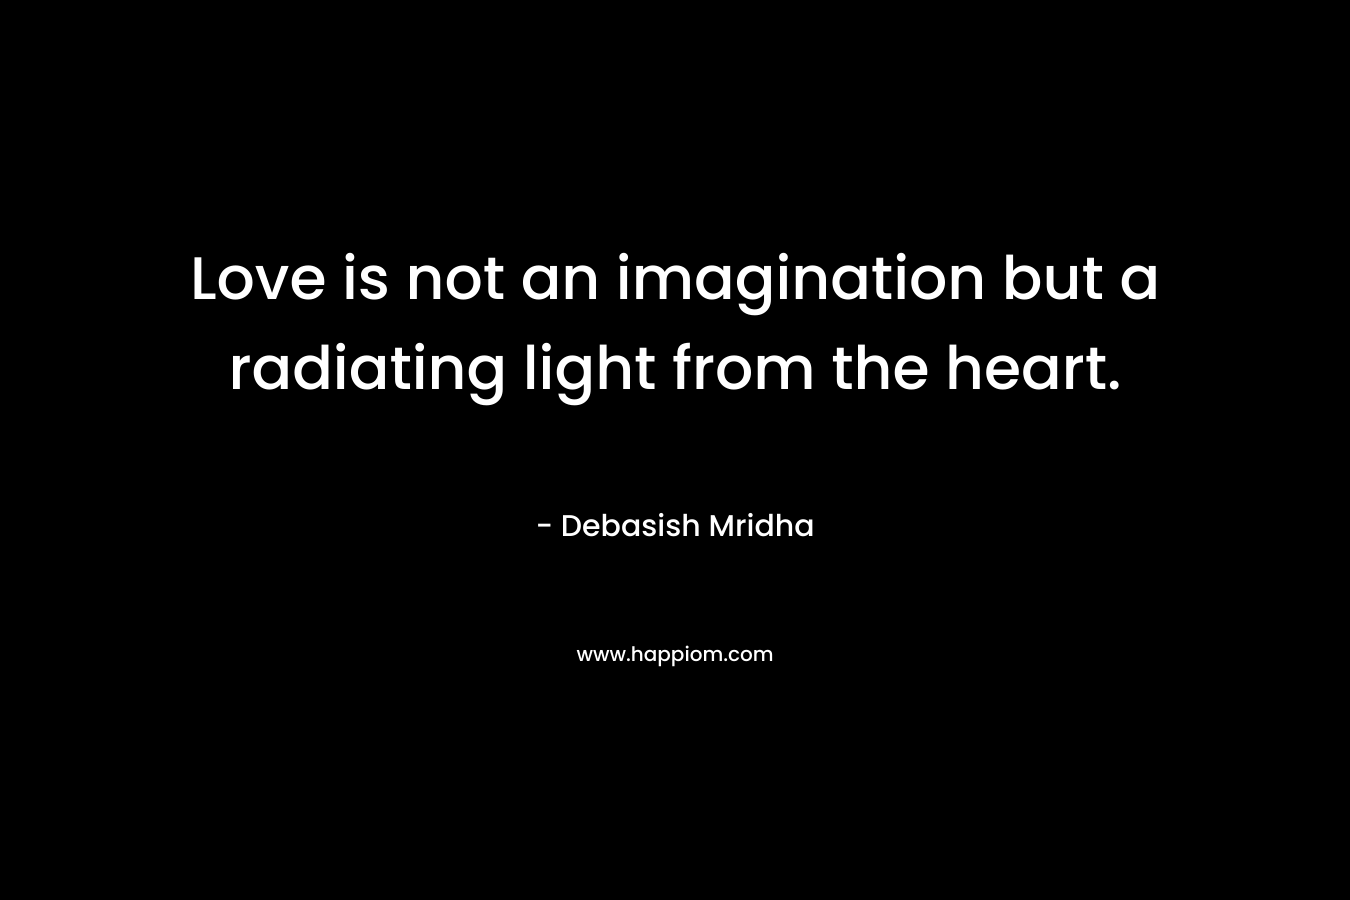 Love is not an imagination but a radiating light from the heart.